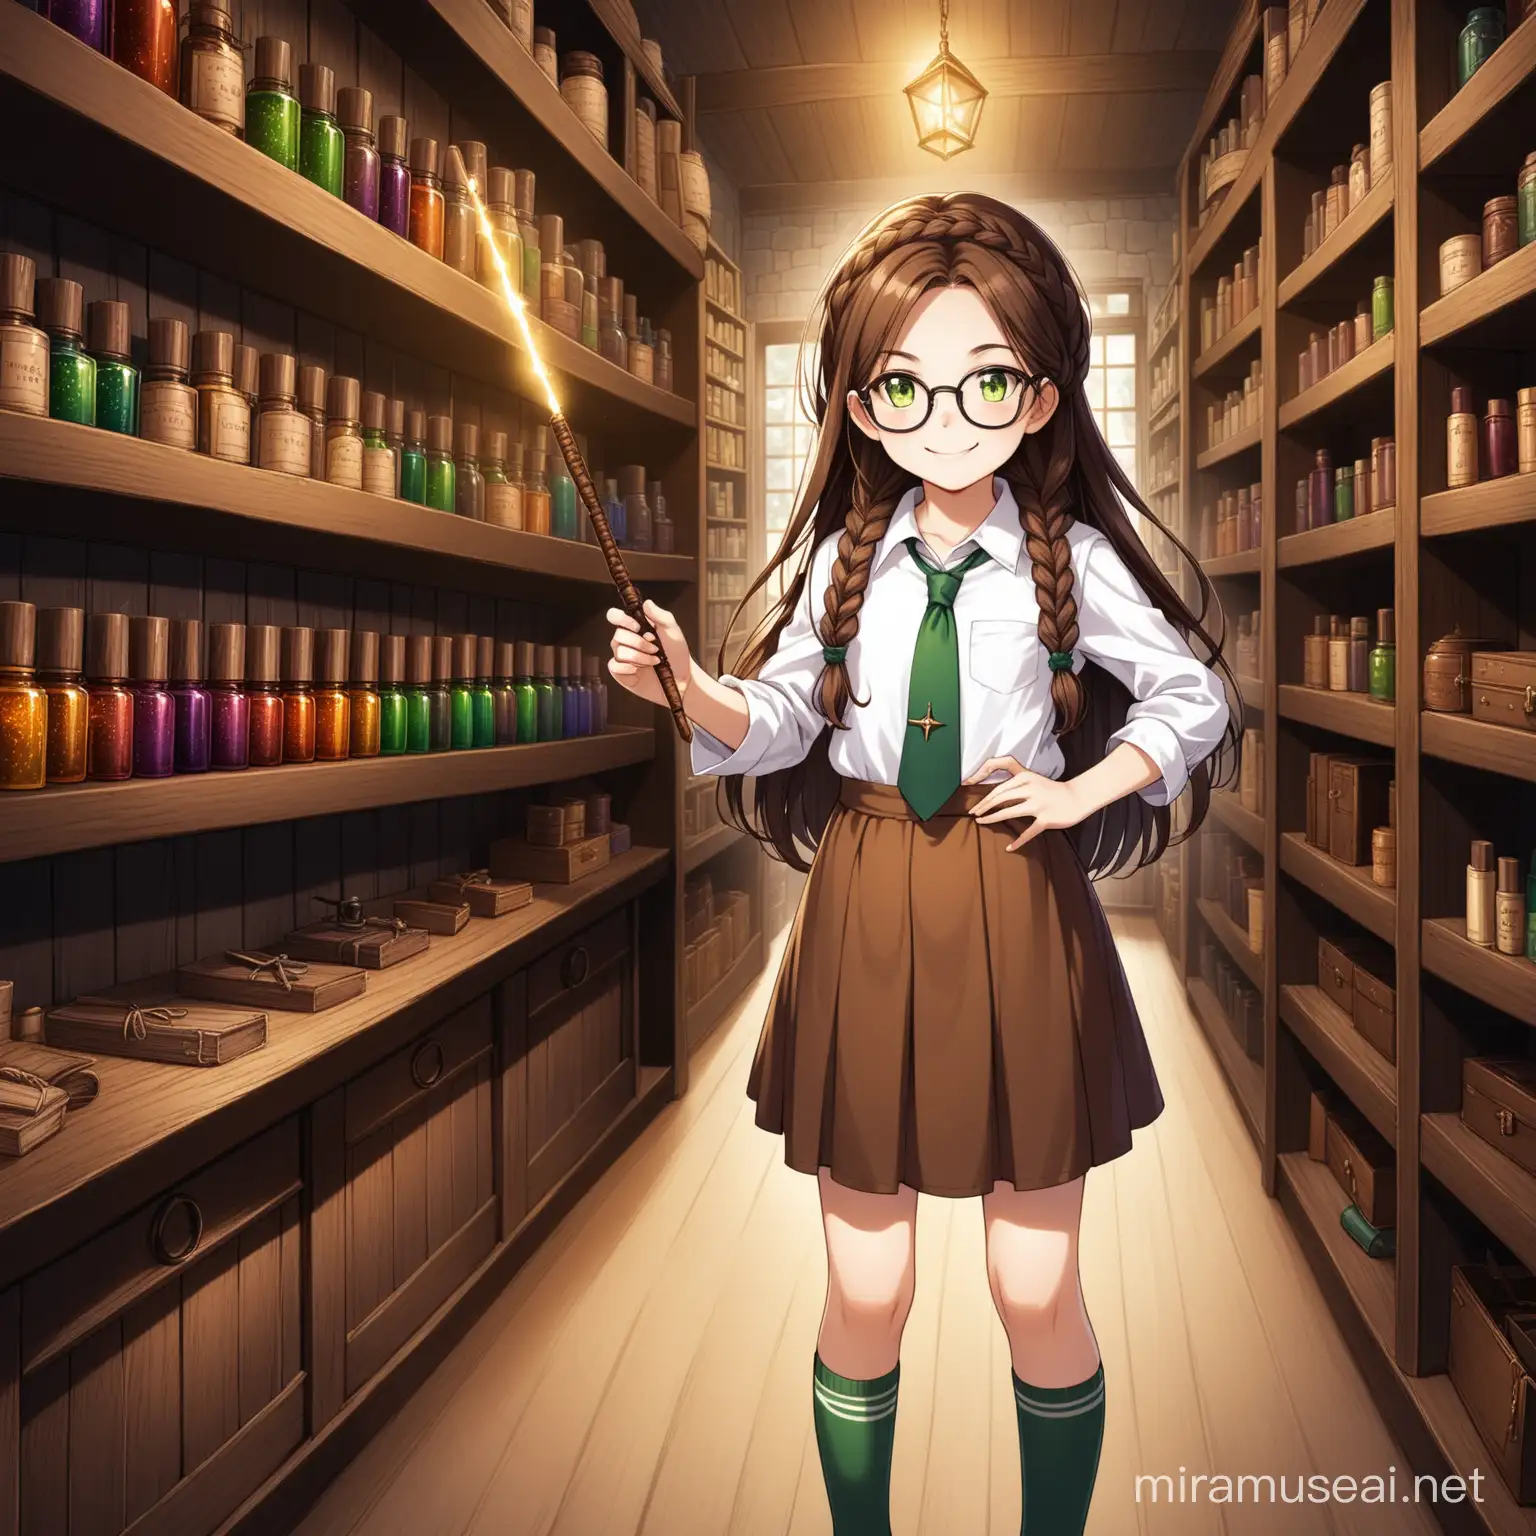 11 year old girl, long brown hair in a fishtail braid, brown scrunchie,  green eyes, smiling, black glasses, white shirt with a brown tie,  brown knee length skirt, brown loafers, white socks, smiling, in a witchcraft shop, holding a wand,  